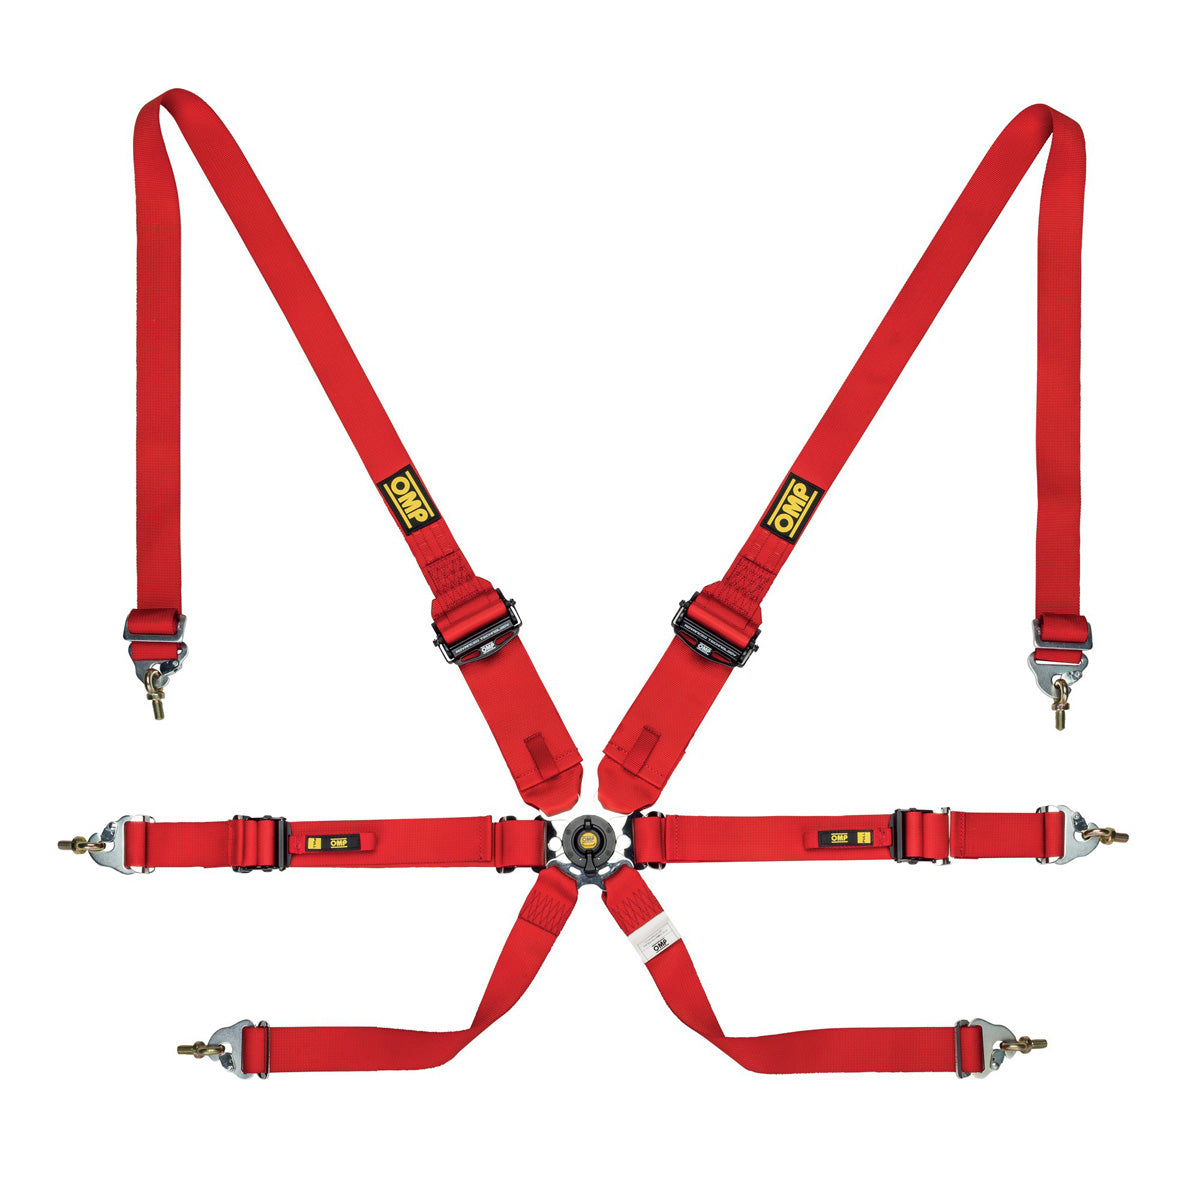 OMP One 3+2 Convertible Harness